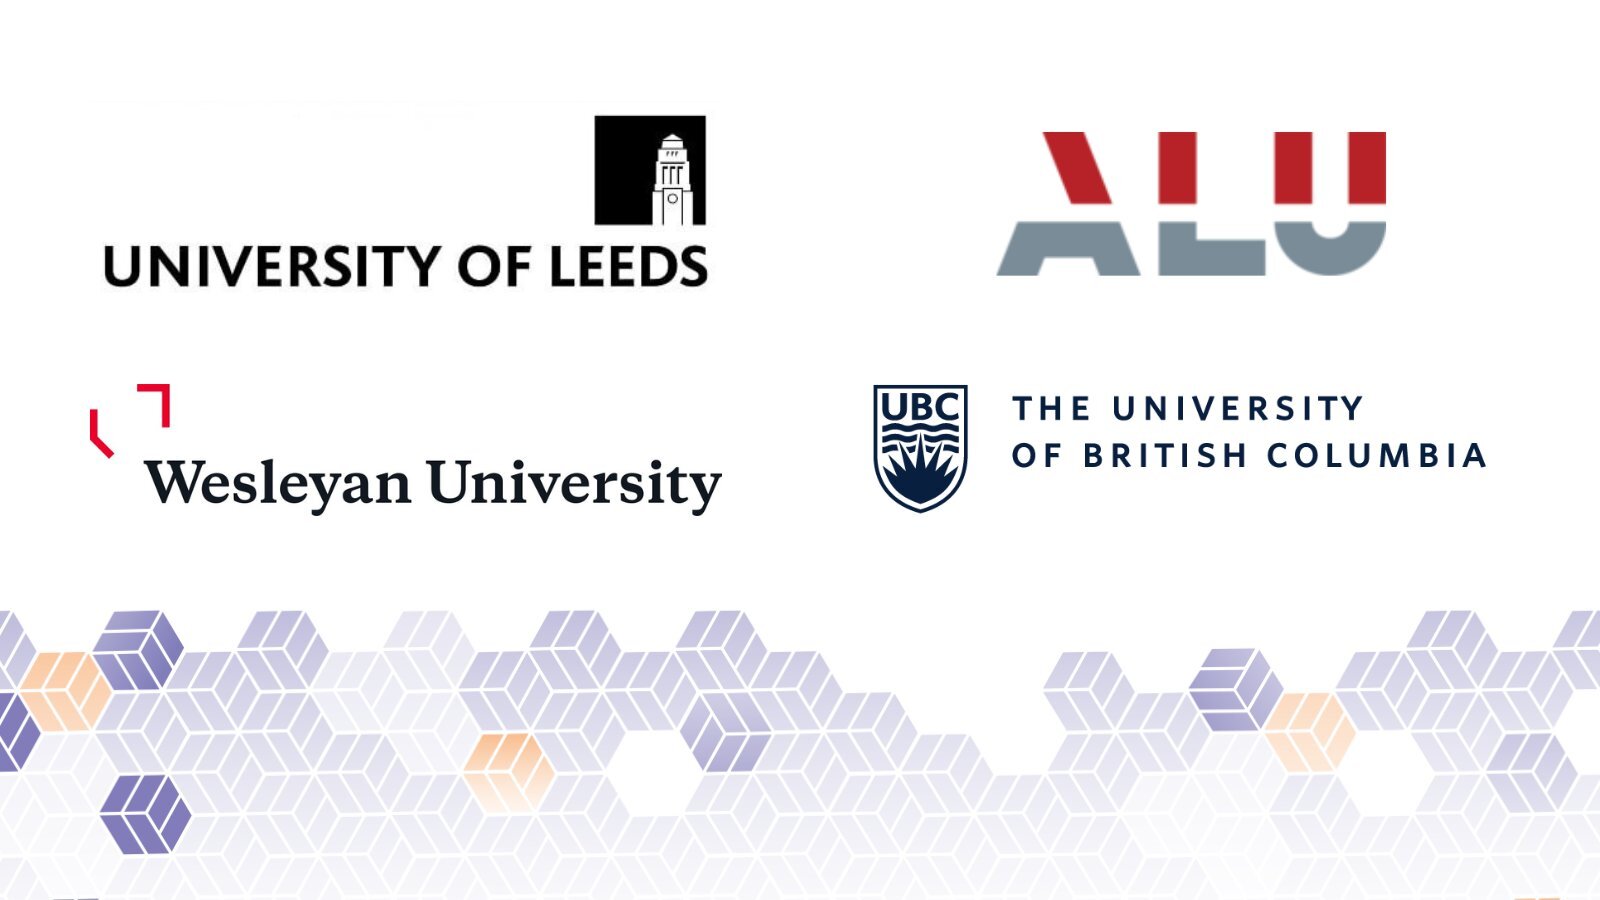 The logos of the Universities who won the highly commended awards.